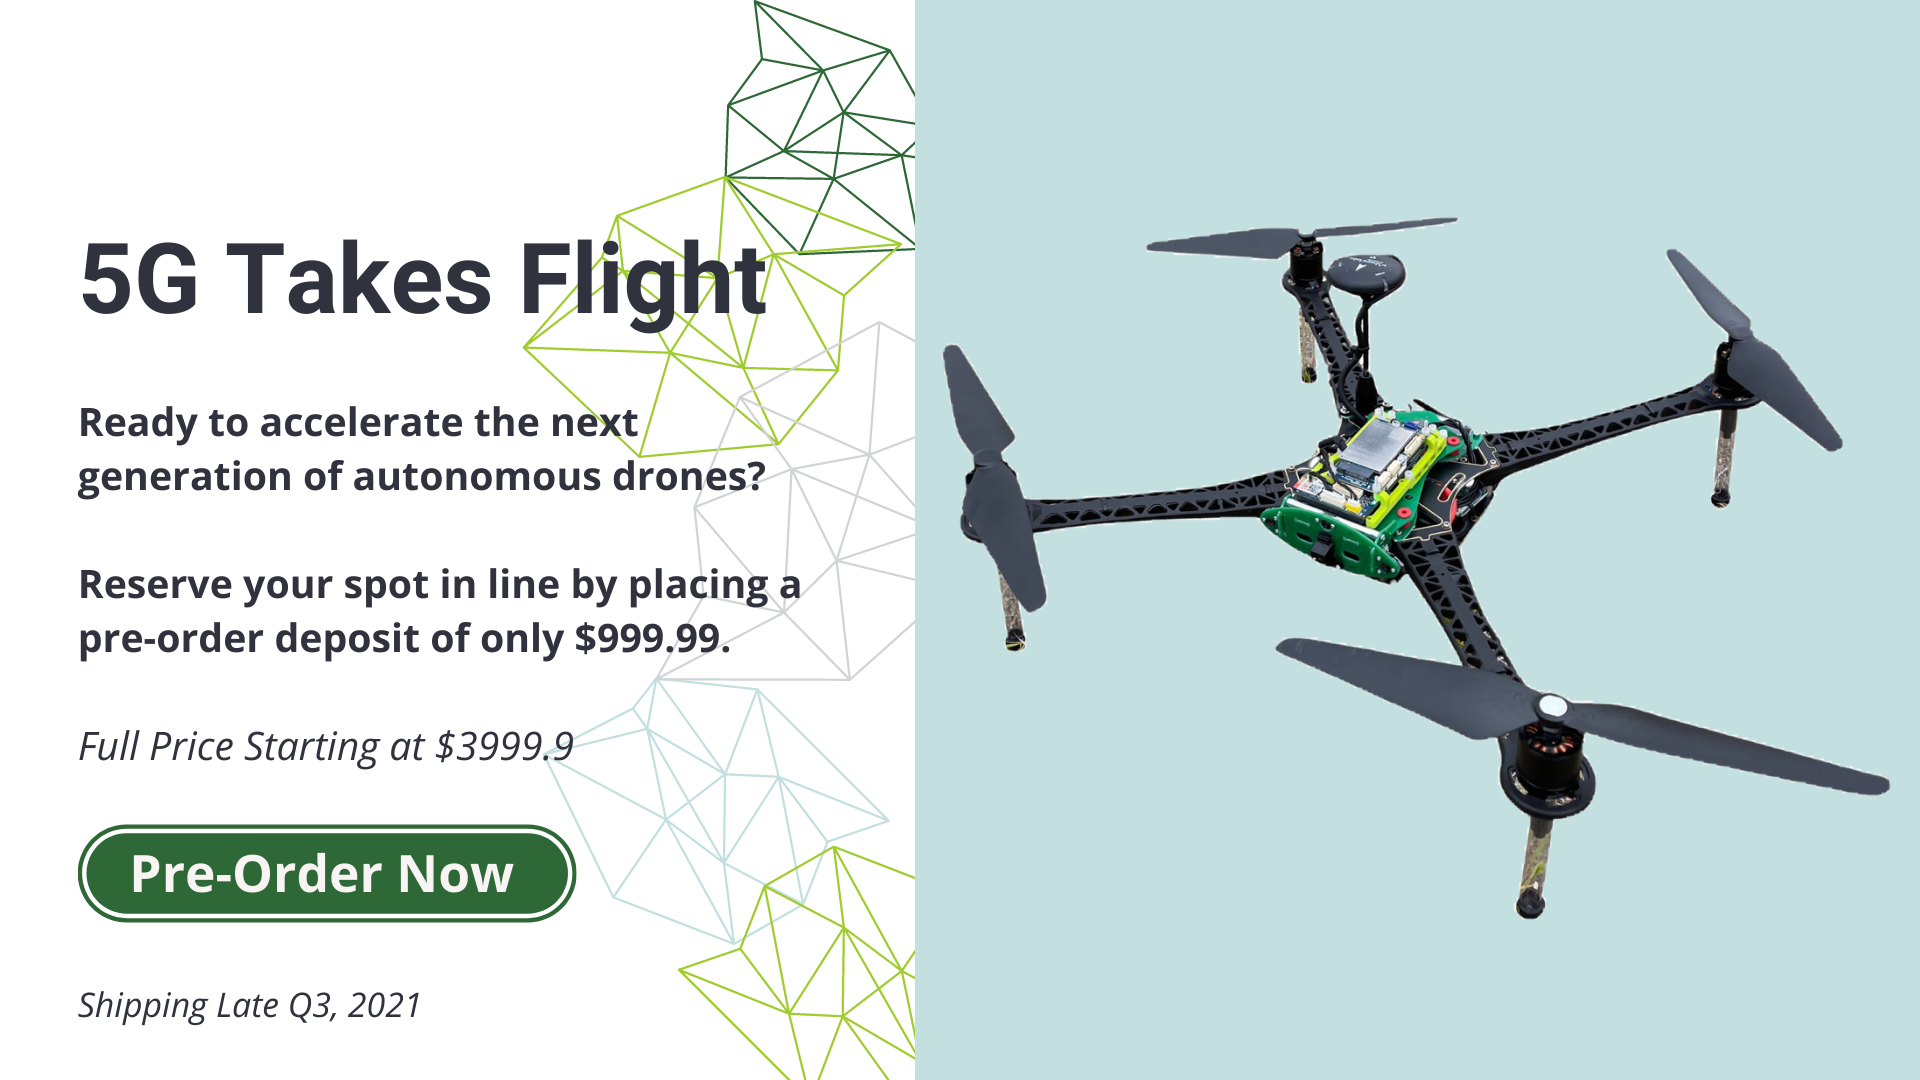 5G Takes Flight. ready to accelerate the next generation of autonomous drones? Reserve your spot in line by placing a pre-order deposit of only $999.99 Full price starting at $3999.99 Pre-order now. Shipping late Q3, 2021